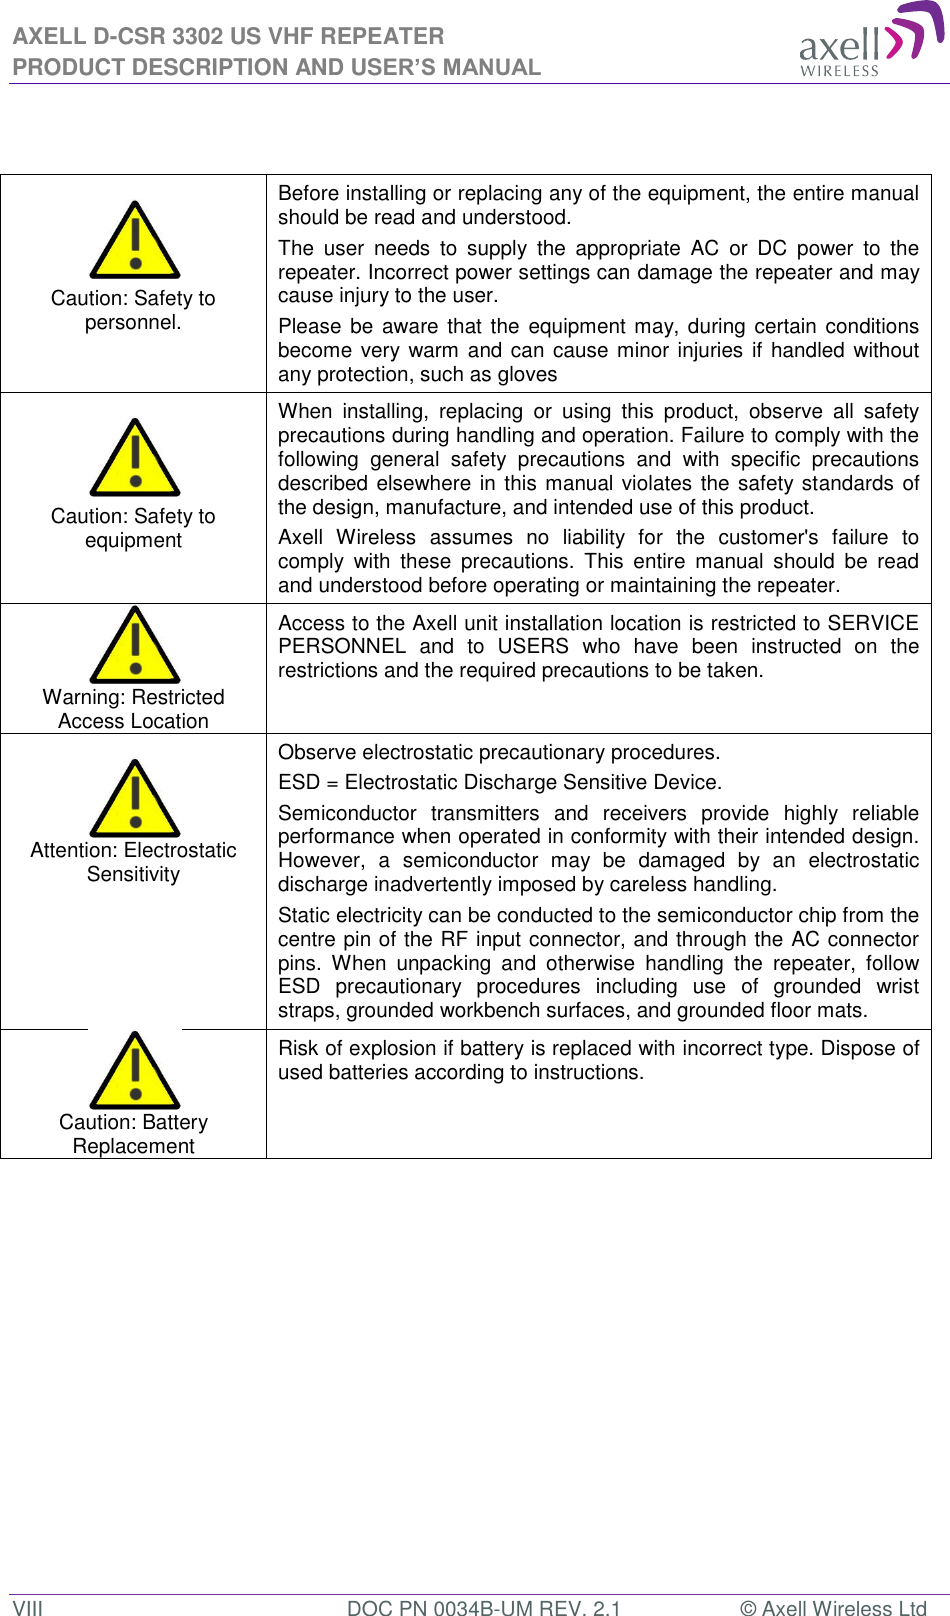 AXELL D-CSR 3302 US VHF REPEATER PRODUCT DESCRIPTION AND USER’S MANUAL VIII  DOC PN 0034B-UM REV. 2.1  © Axell Wireless Ltd                   Caution: Safety to personnel. Before installing or replacing any of the equipment, the entire manual should be read and understood. The  user  needs  to  supply  the  appropriate  AC  or  DC  power  to  the repeater. Incorrect power settings can damage the repeater and may cause injury to the user. Please be aware that the  equipment may, during certain conditions become very warm and can cause minor injuries if handled without any protection, such as gloves   Caution: Safety to equipment When  installing,  replacing  or  using  this  product,  observe  all  safety precautions during handling and operation. Failure to comply with the following  general  safety  precautions  and  with  specific  precautions described elsewhere in this manual violates the safety standards of the design, manufacture, and intended use of this product.  Axell  Wireless  assumes  no  liability  for  the  customer&apos;s  failure  to comply  with  these  precautions.  This  entire  manual  should  be  read and understood before operating or maintaining the repeater.  Warning: Restricted Access Location Access to the Axell unit installation location is restricted to SERVICE PERSONNEL  and  to  USERS  who  have  been  instructed  on  the restrictions and the required precautions to be taken.   Attention: Electrostatic Sensitivity  Observe electrostatic precautionary procedures. ESD = Electrostatic Discharge Sensitive Device.  Semiconductor  transmitters  and  receivers  provide  highly  reliable performance when operated in conformity with their intended design. However,  a  semiconductor  may  be  damaged  by  an  electrostatic discharge inadvertently imposed by careless handling. Static electricity can be conducted to the semiconductor chip from the centre pin of the RF input connector, and through the AC connector pins.  When  unpacking  and  otherwise  handling  the  repeater,  follow ESD  precautionary  procedures  including  use  of  grounded  wrist straps, grounded workbench surfaces, and grounded floor mats.  Caution: Battery Replacement Risk of explosion if battery is replaced with incorrect type. Dispose of used batteries according to instructions. 